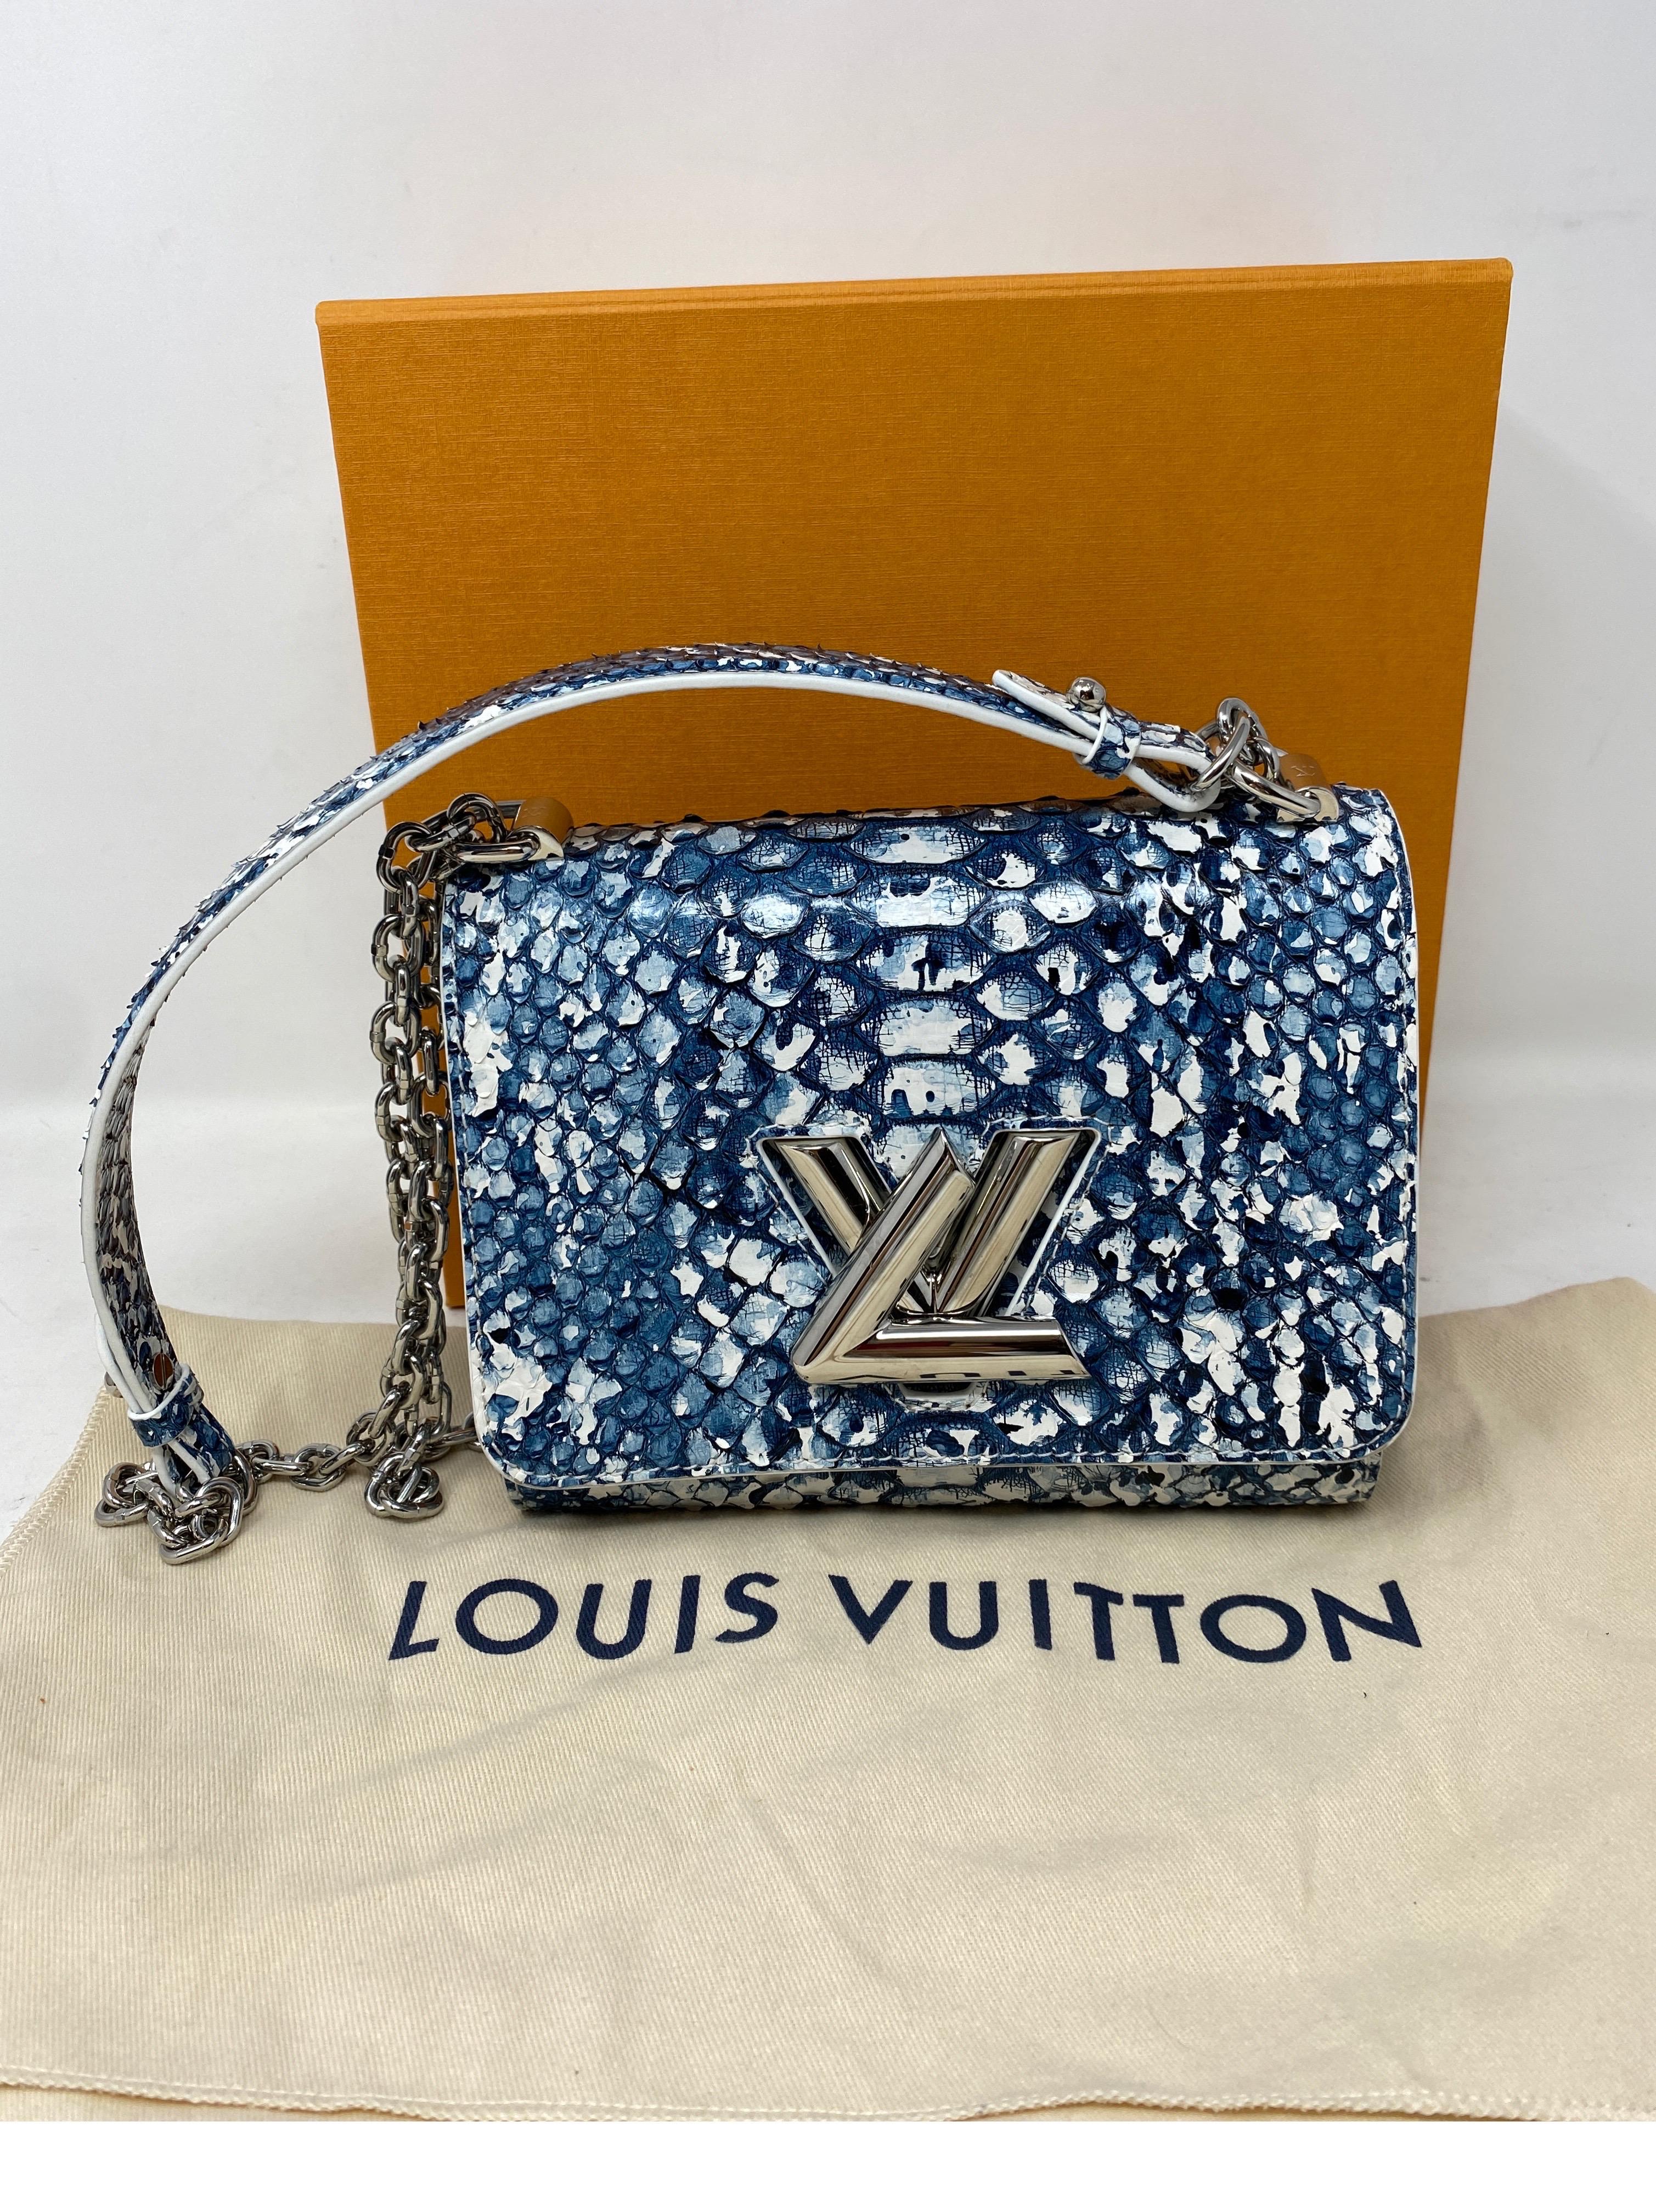 Louis Vuitton Python Twist Crossbody Bag. Mini size can be worn crossbody. Strap can be worn doubled as a shorter shoulder bag. Rare and limited. Python exotic leather bag in excellent like new condition. Collector's piece. Includes original tags,